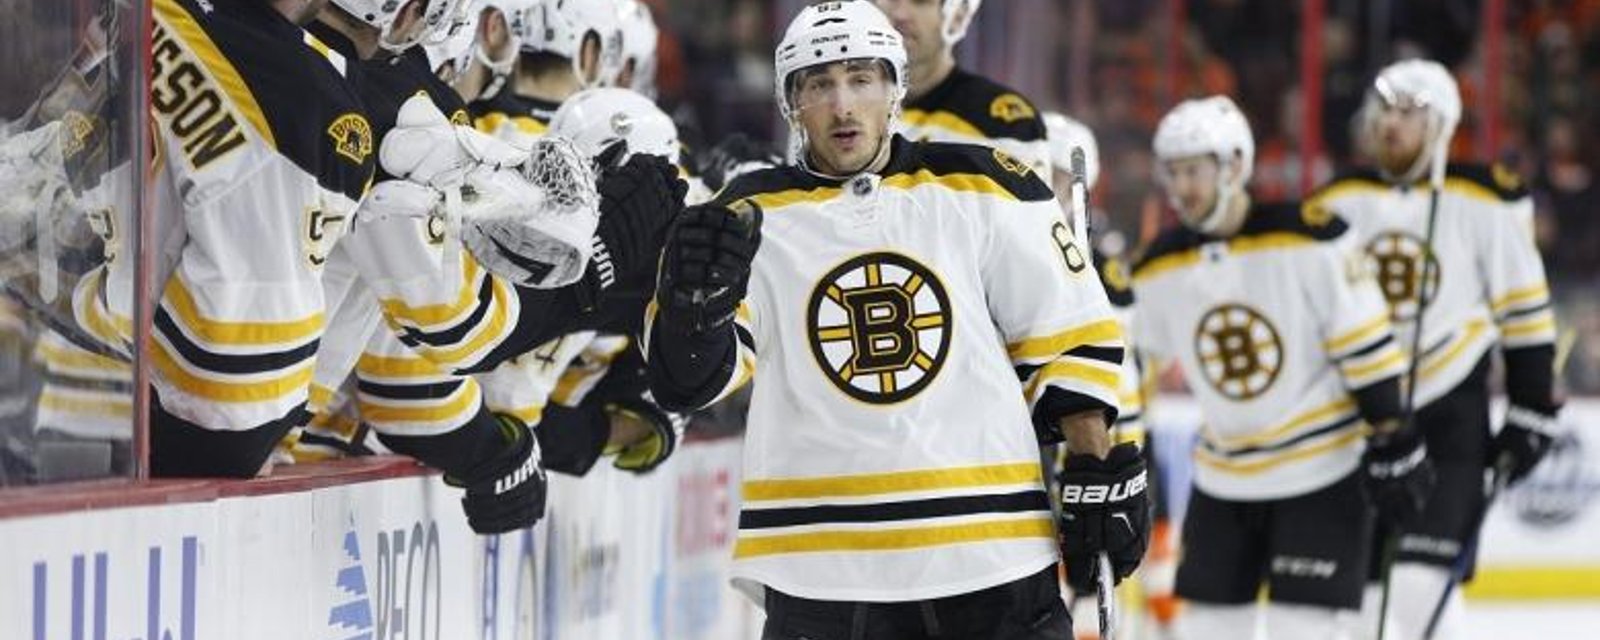 Streaking Brad Marchand scores the fastest goal in Bruins history.